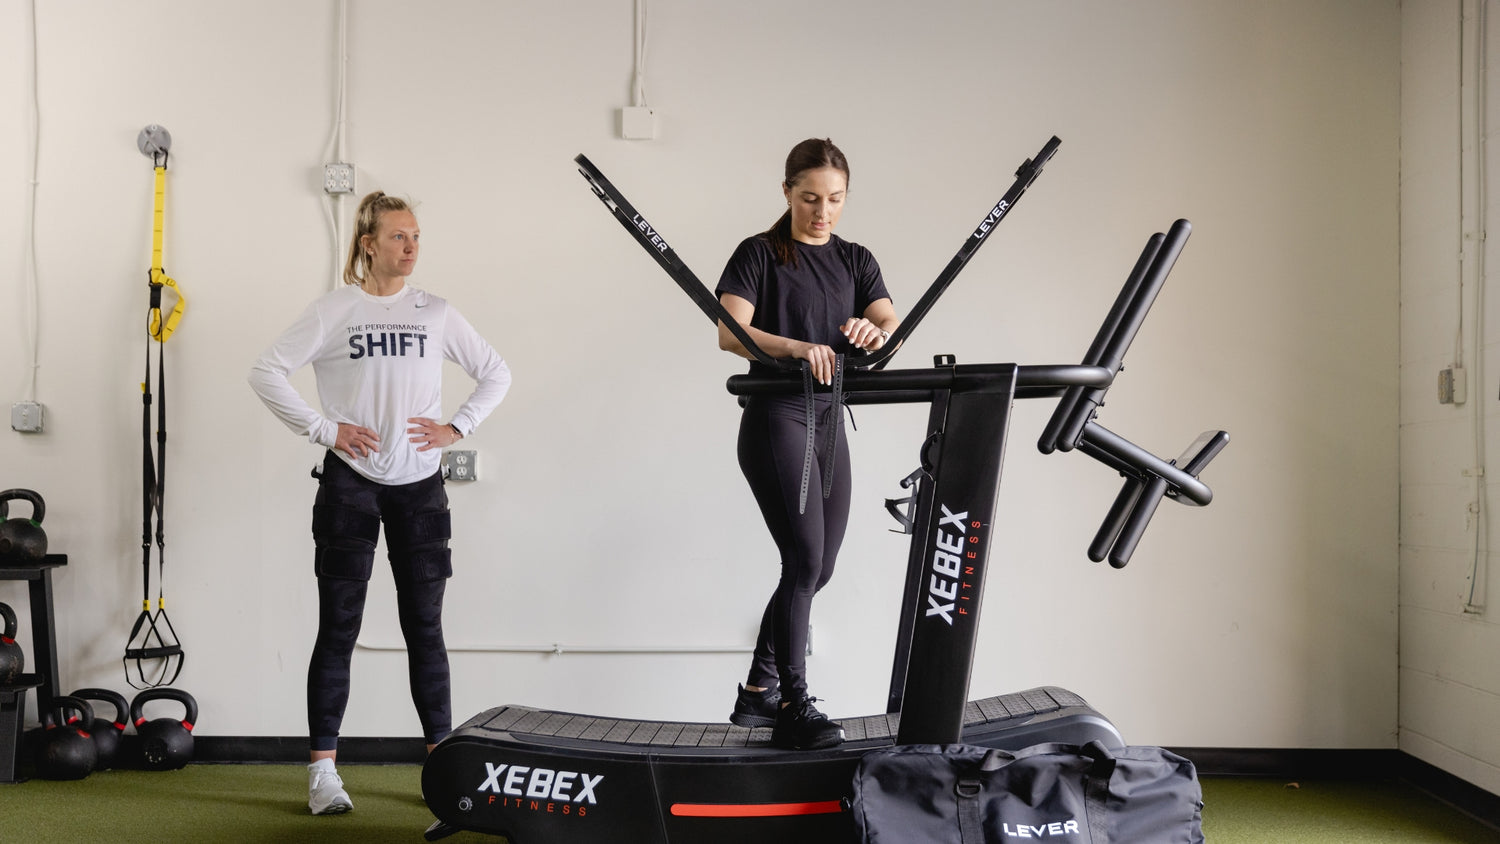 The Benefits of Training with the LEVER System